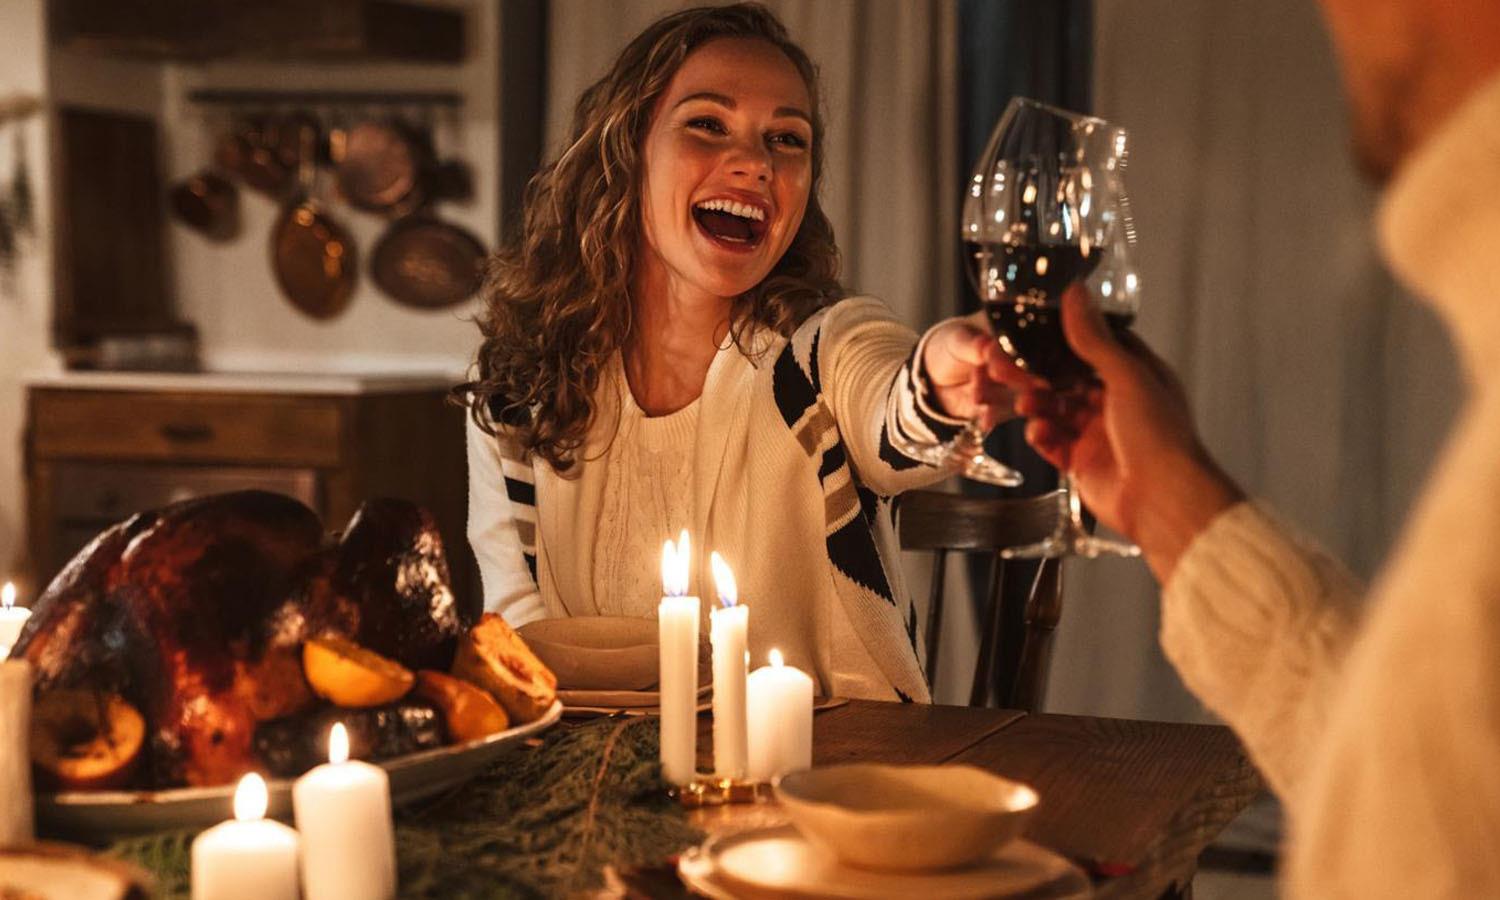 Woman clinking wine glass over Christmas dining table with man